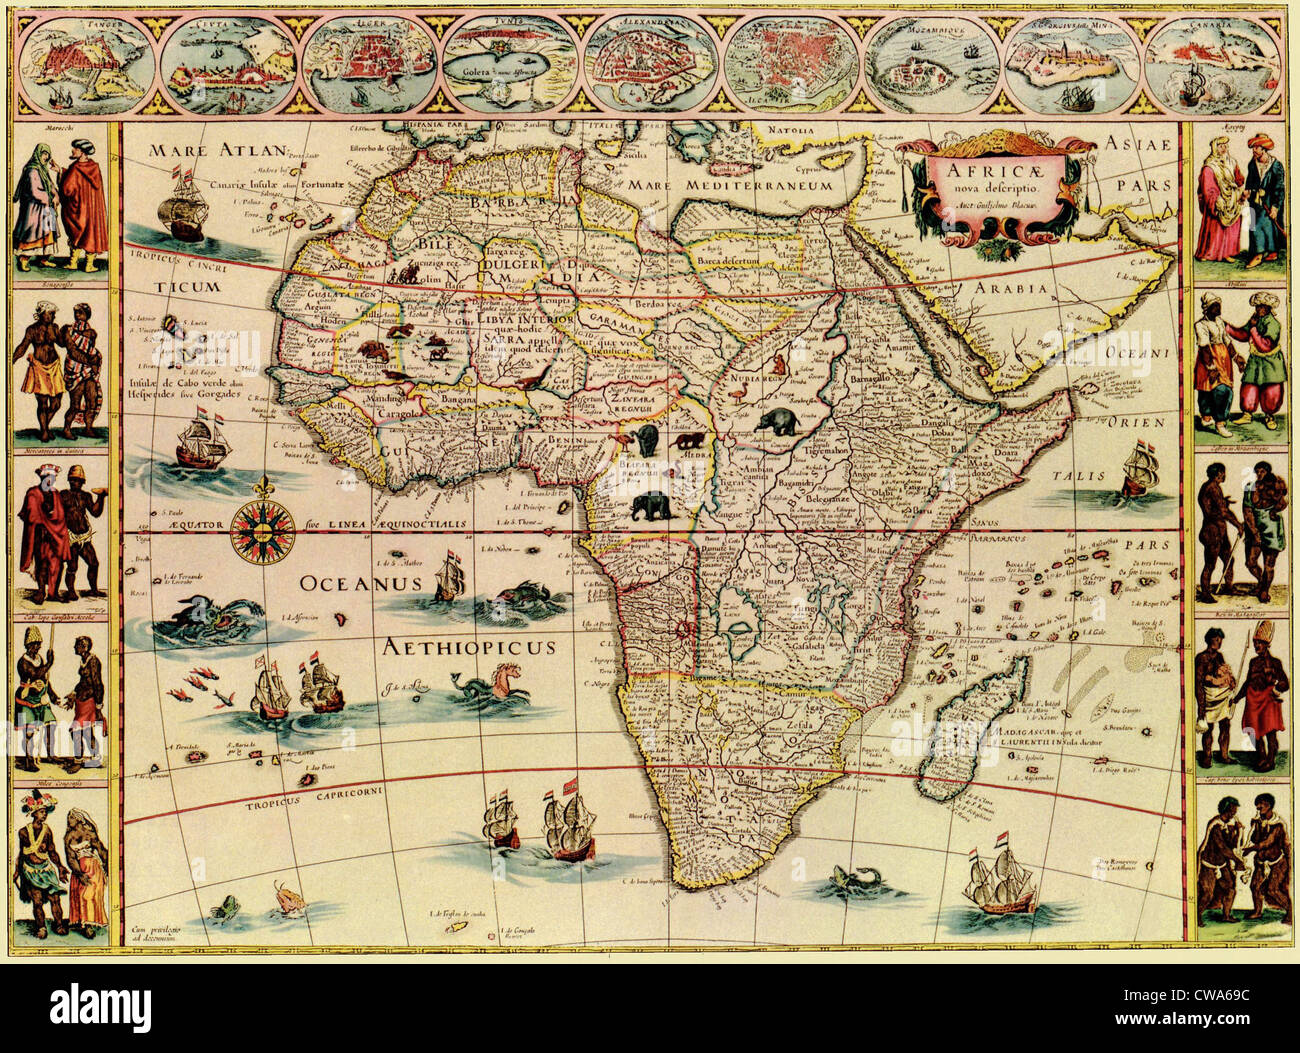 Map of Africa from 1660s. Top border depicts African cities, and side borders show men and women of African peoples. Stock Photo